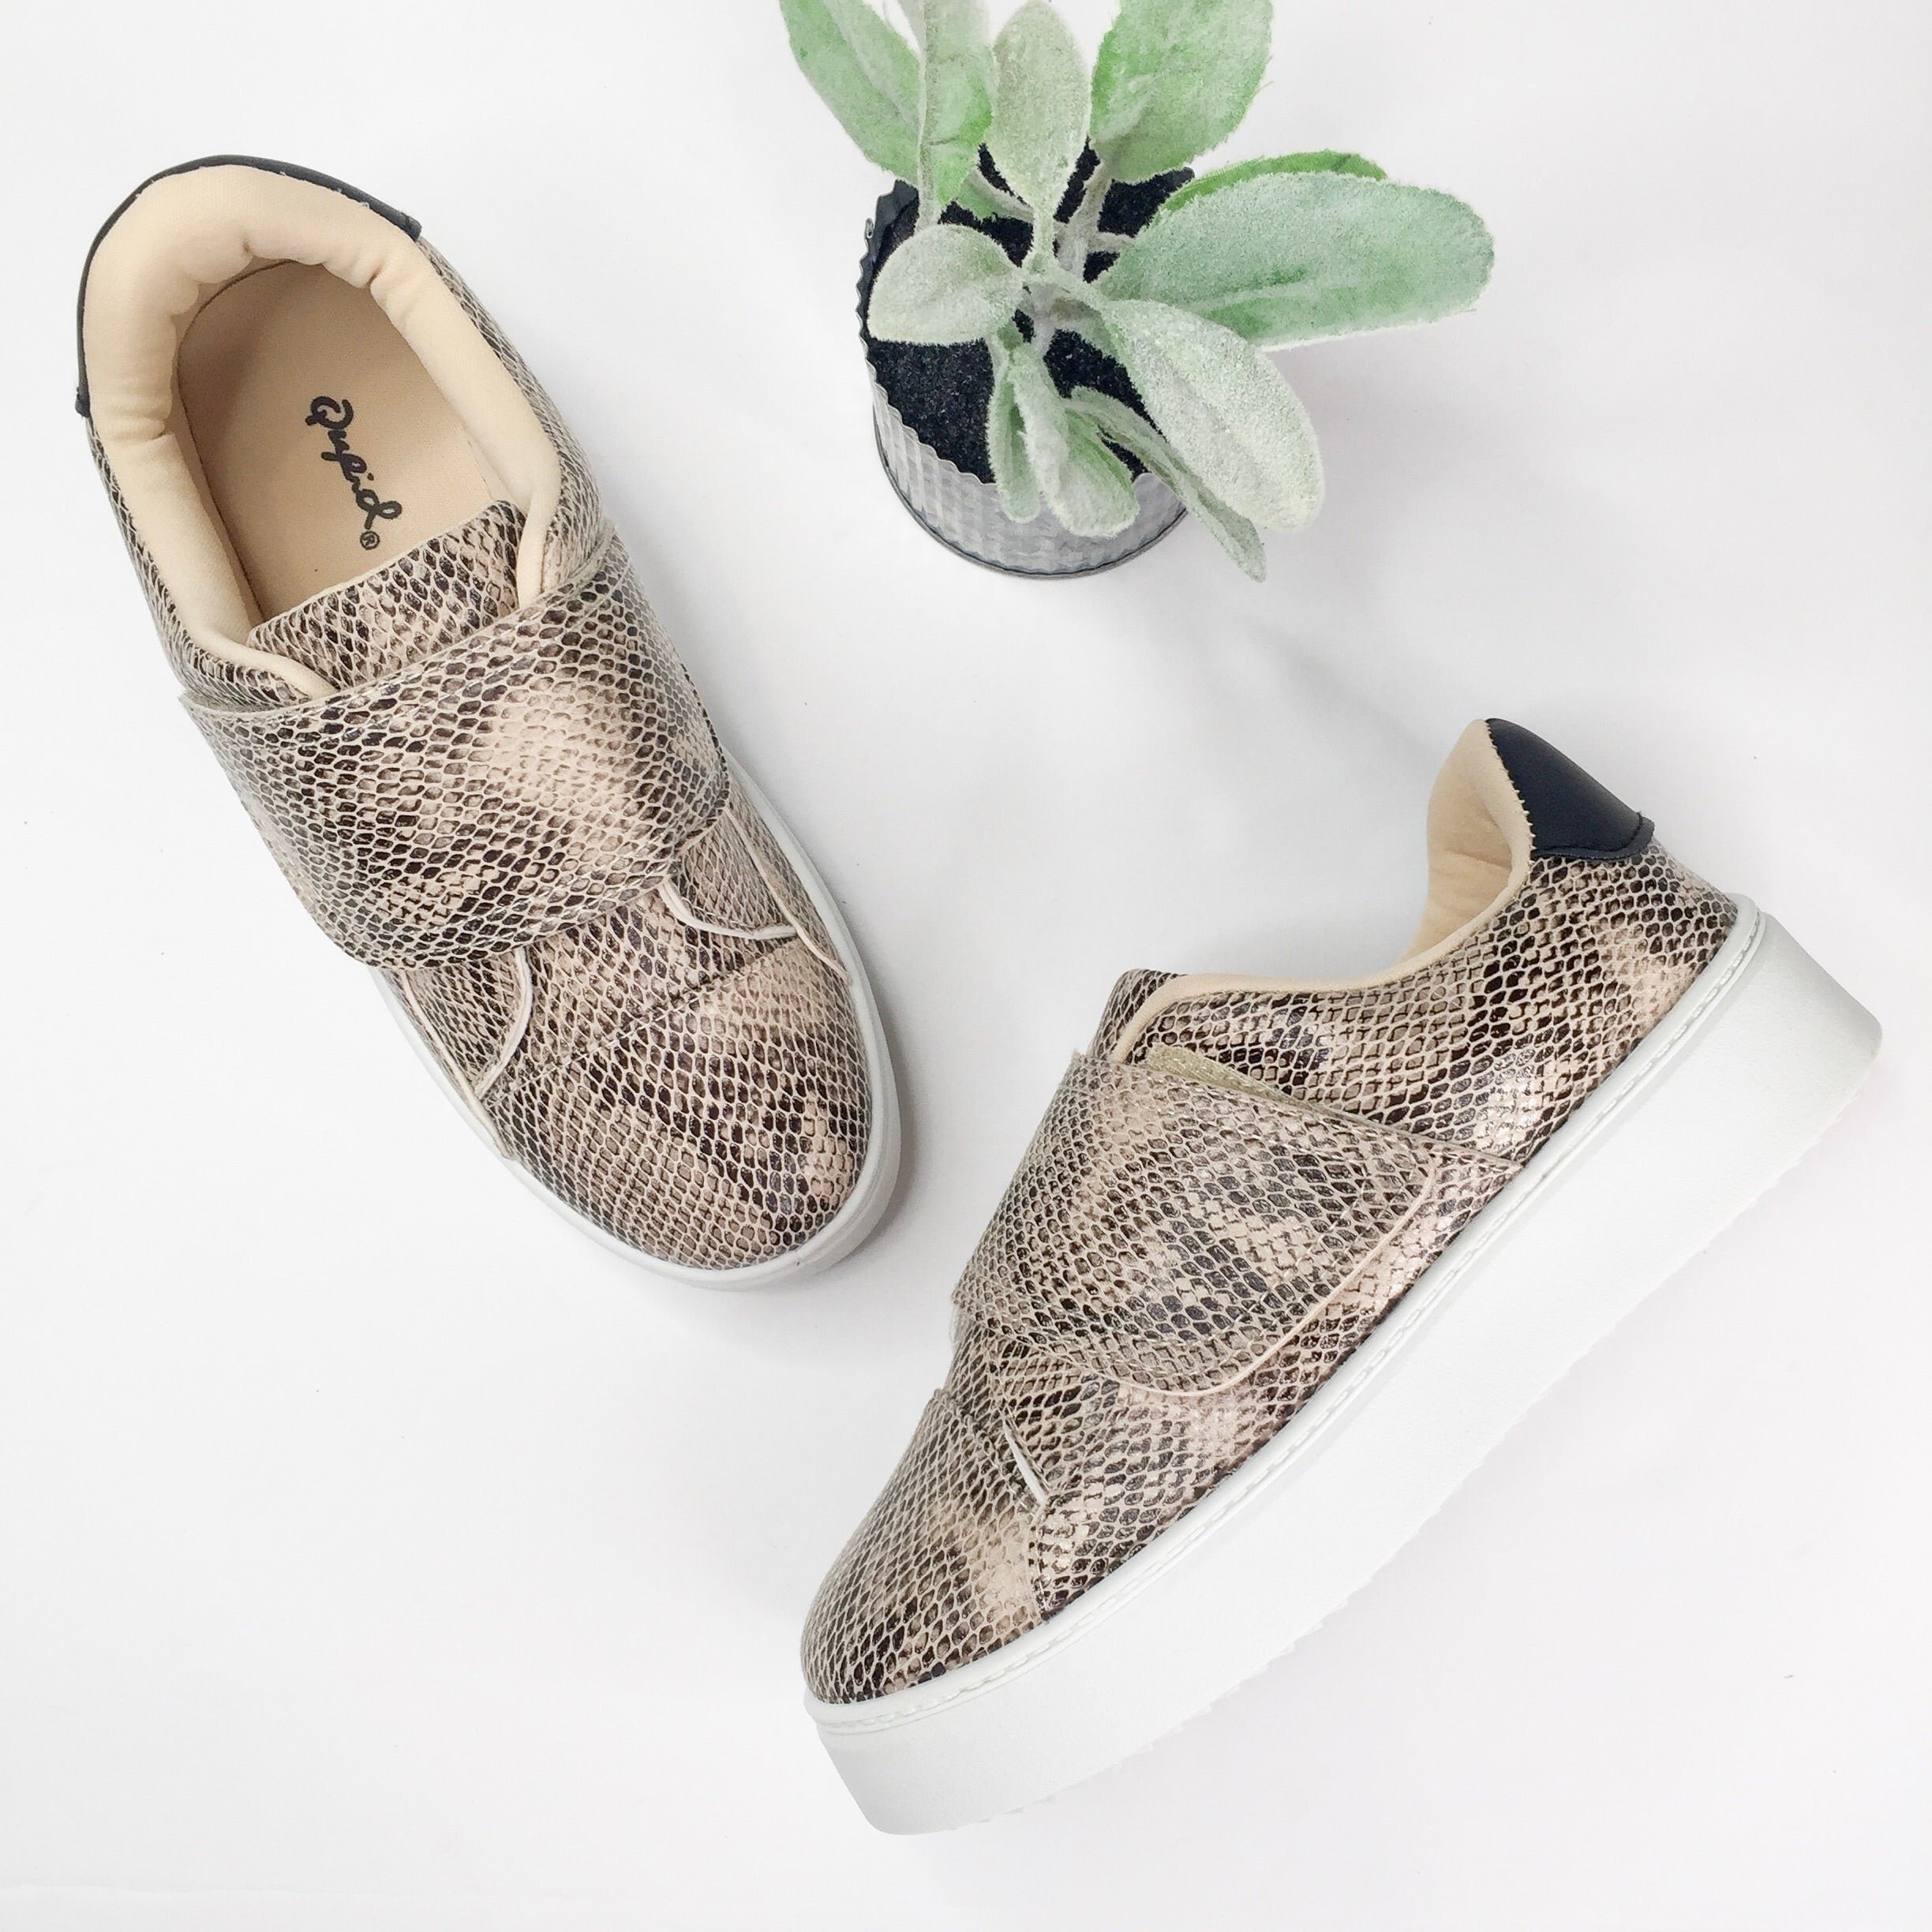 Last Chance Size 6 & 7 | Don't Be Moody Snakeskin Velcro Platform Sneakers - Giddy Up Glamour Boutique